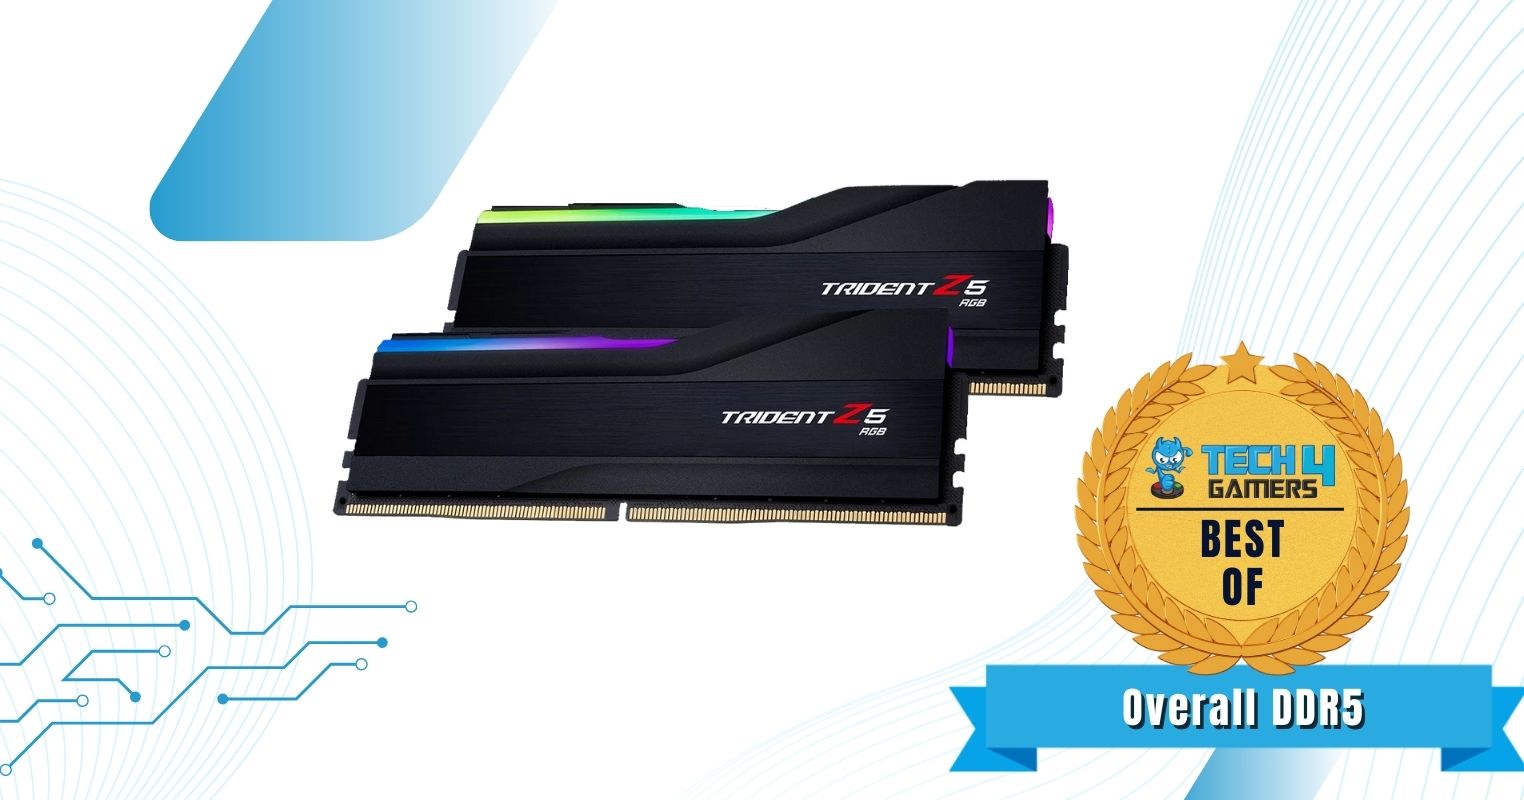 Best Overall DDR5 RAM For i5-12600K - G.Skill Trident Z5 RGB